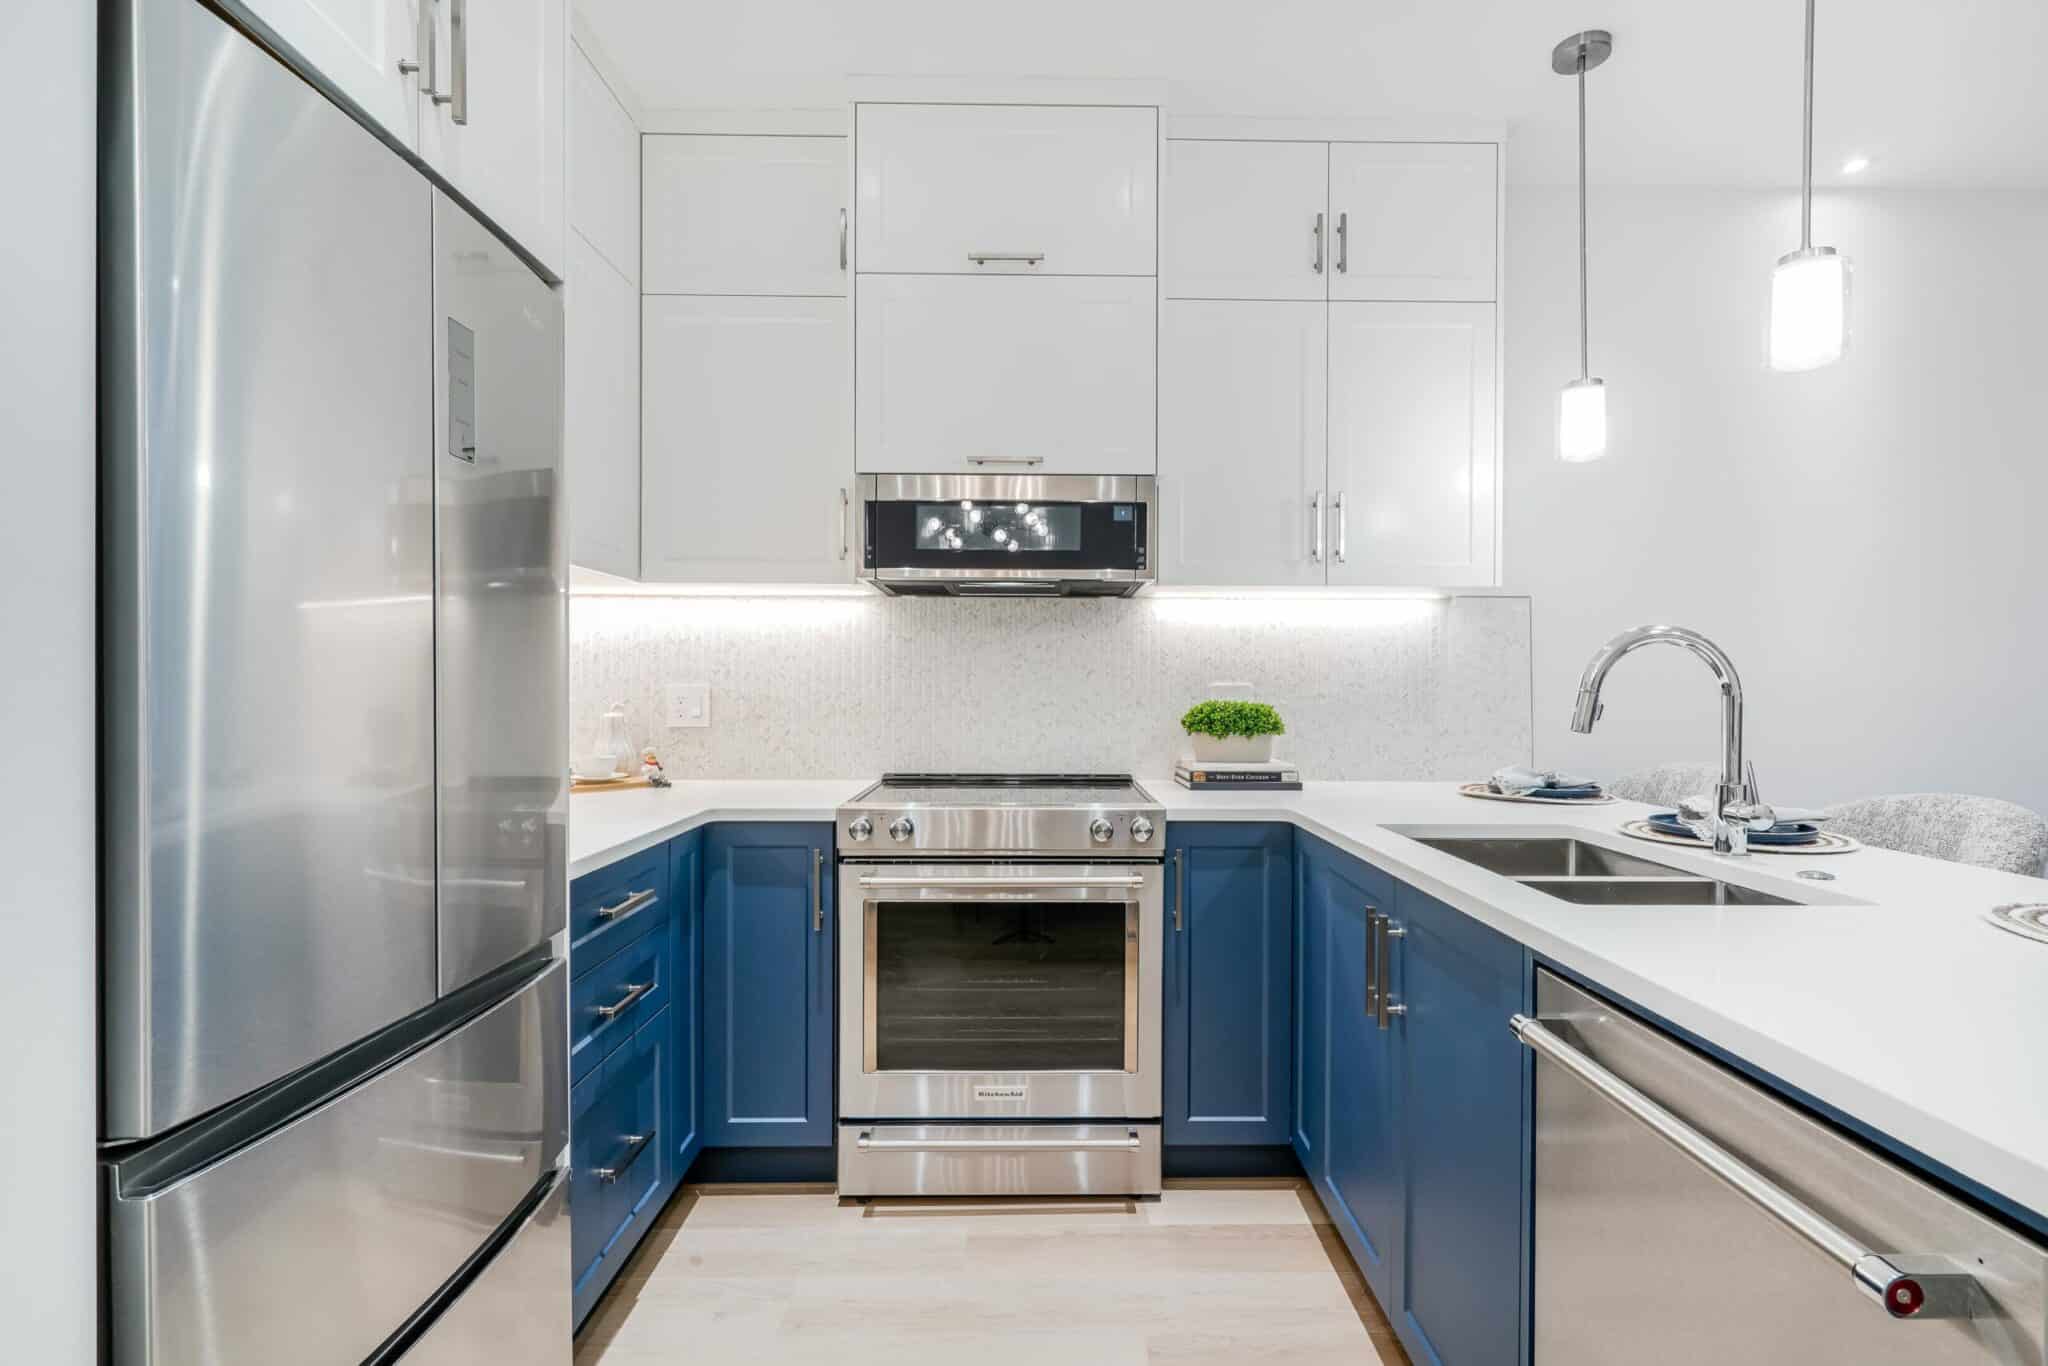 kitchen-renovation-modern-traditional-transitional-vancouver-staging-stainless-steel-appliances-sink-faucet-unique